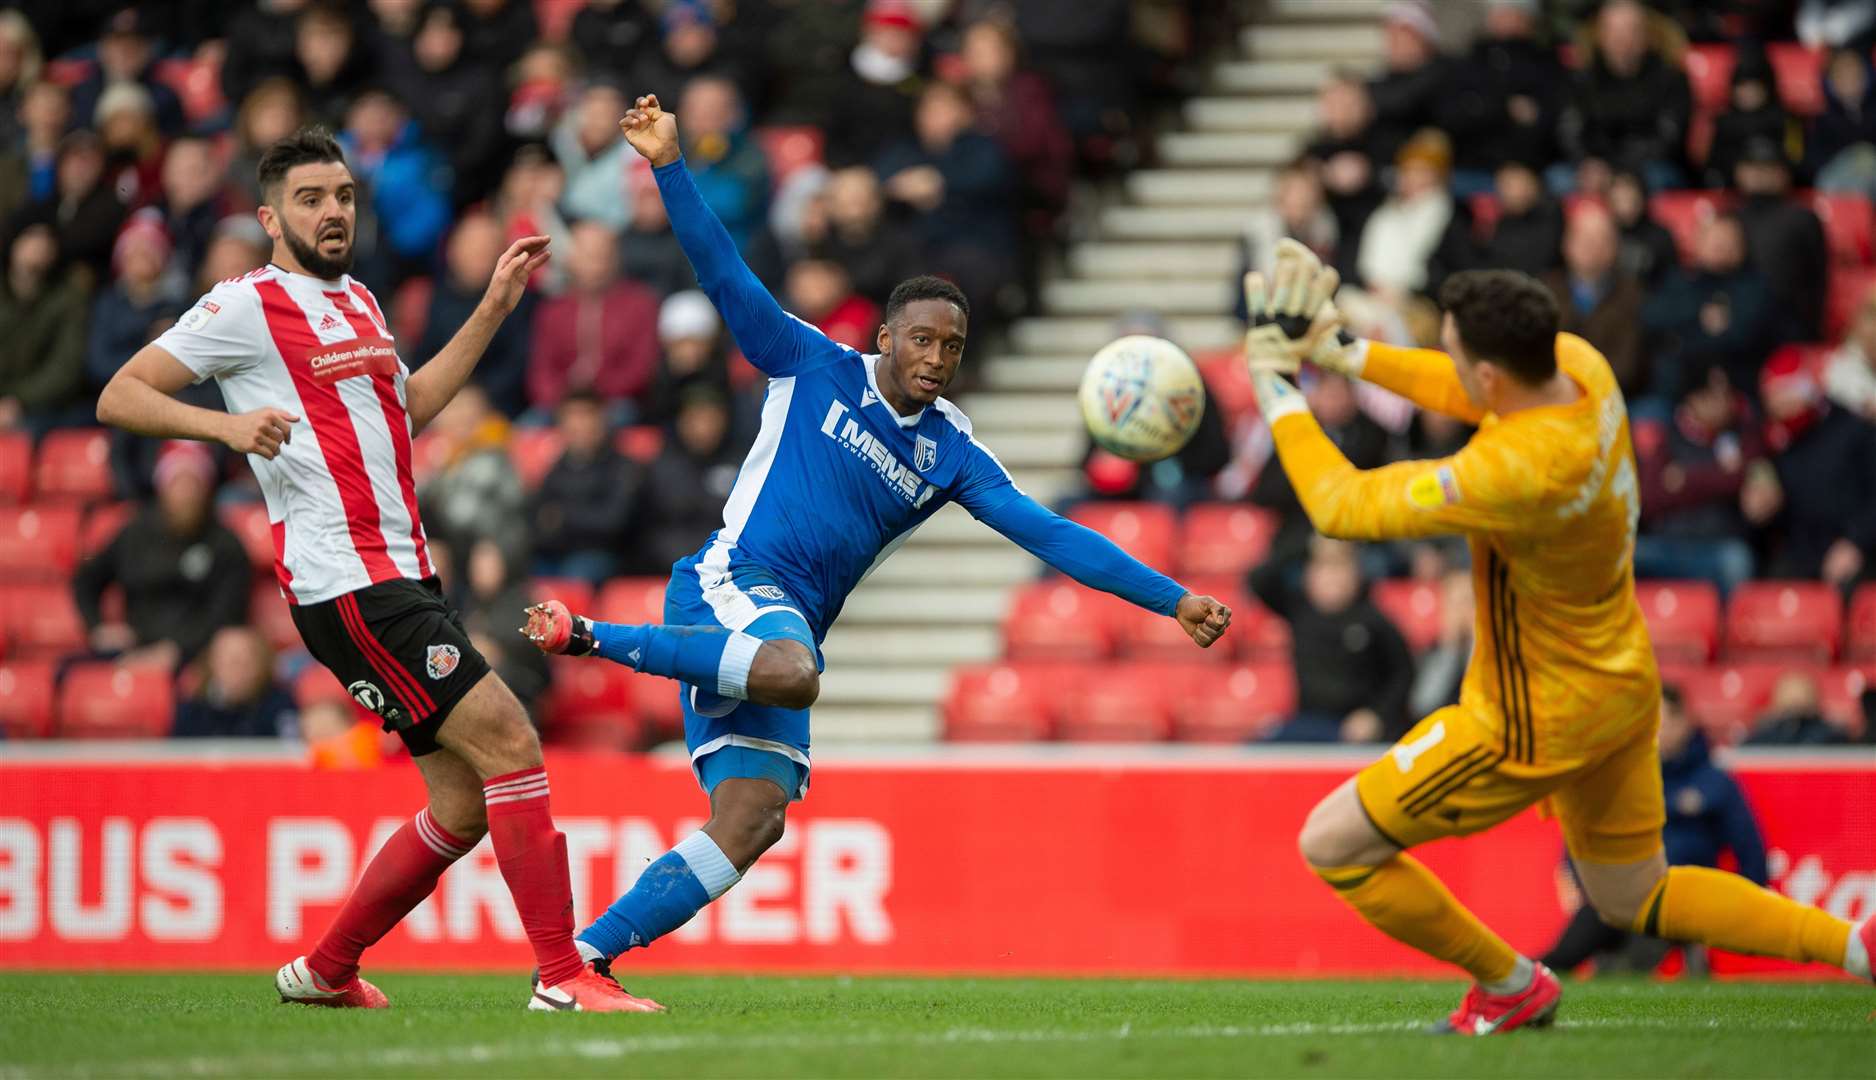 Gillingham were last in competitive action on March 7 against Sunderland Picture: Ady Kerry